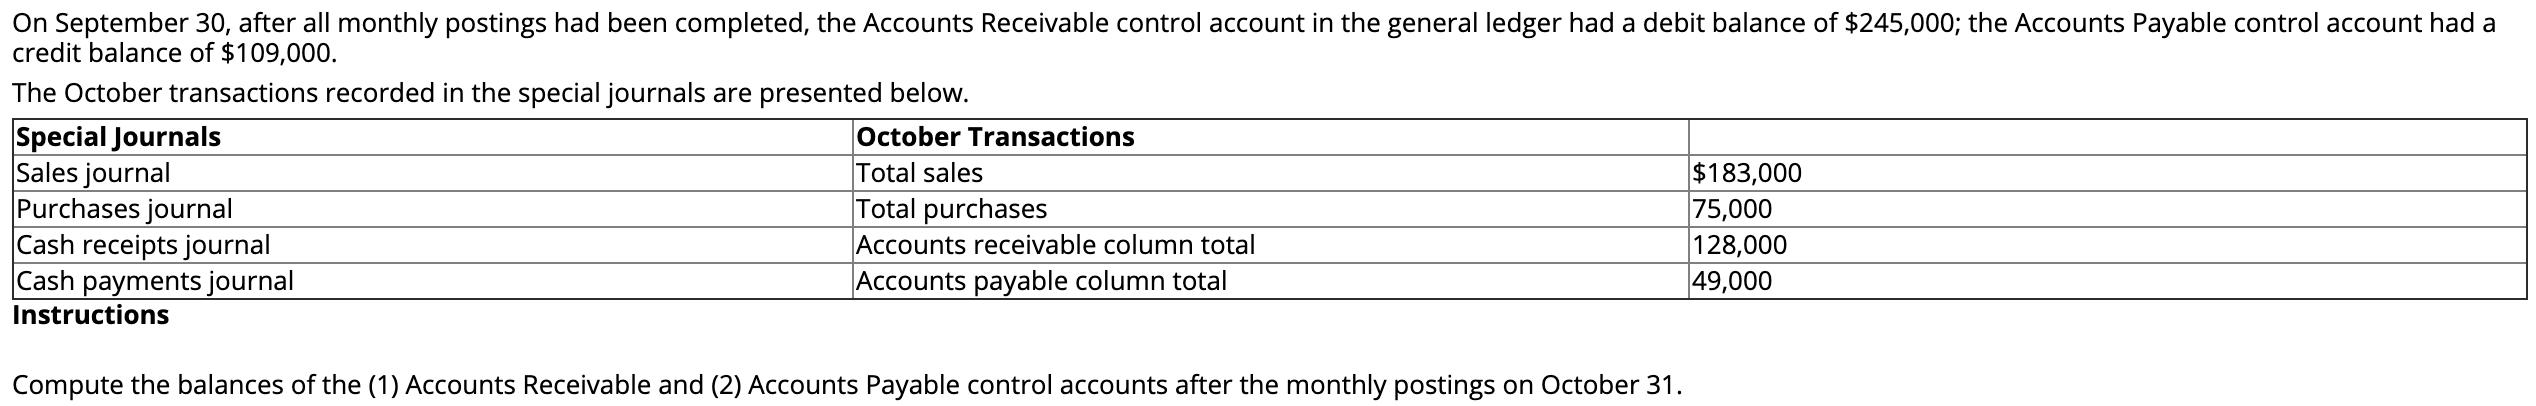 On September 30, after all monthly postings had been completed, the Accounts Receivable control account in the general ledger